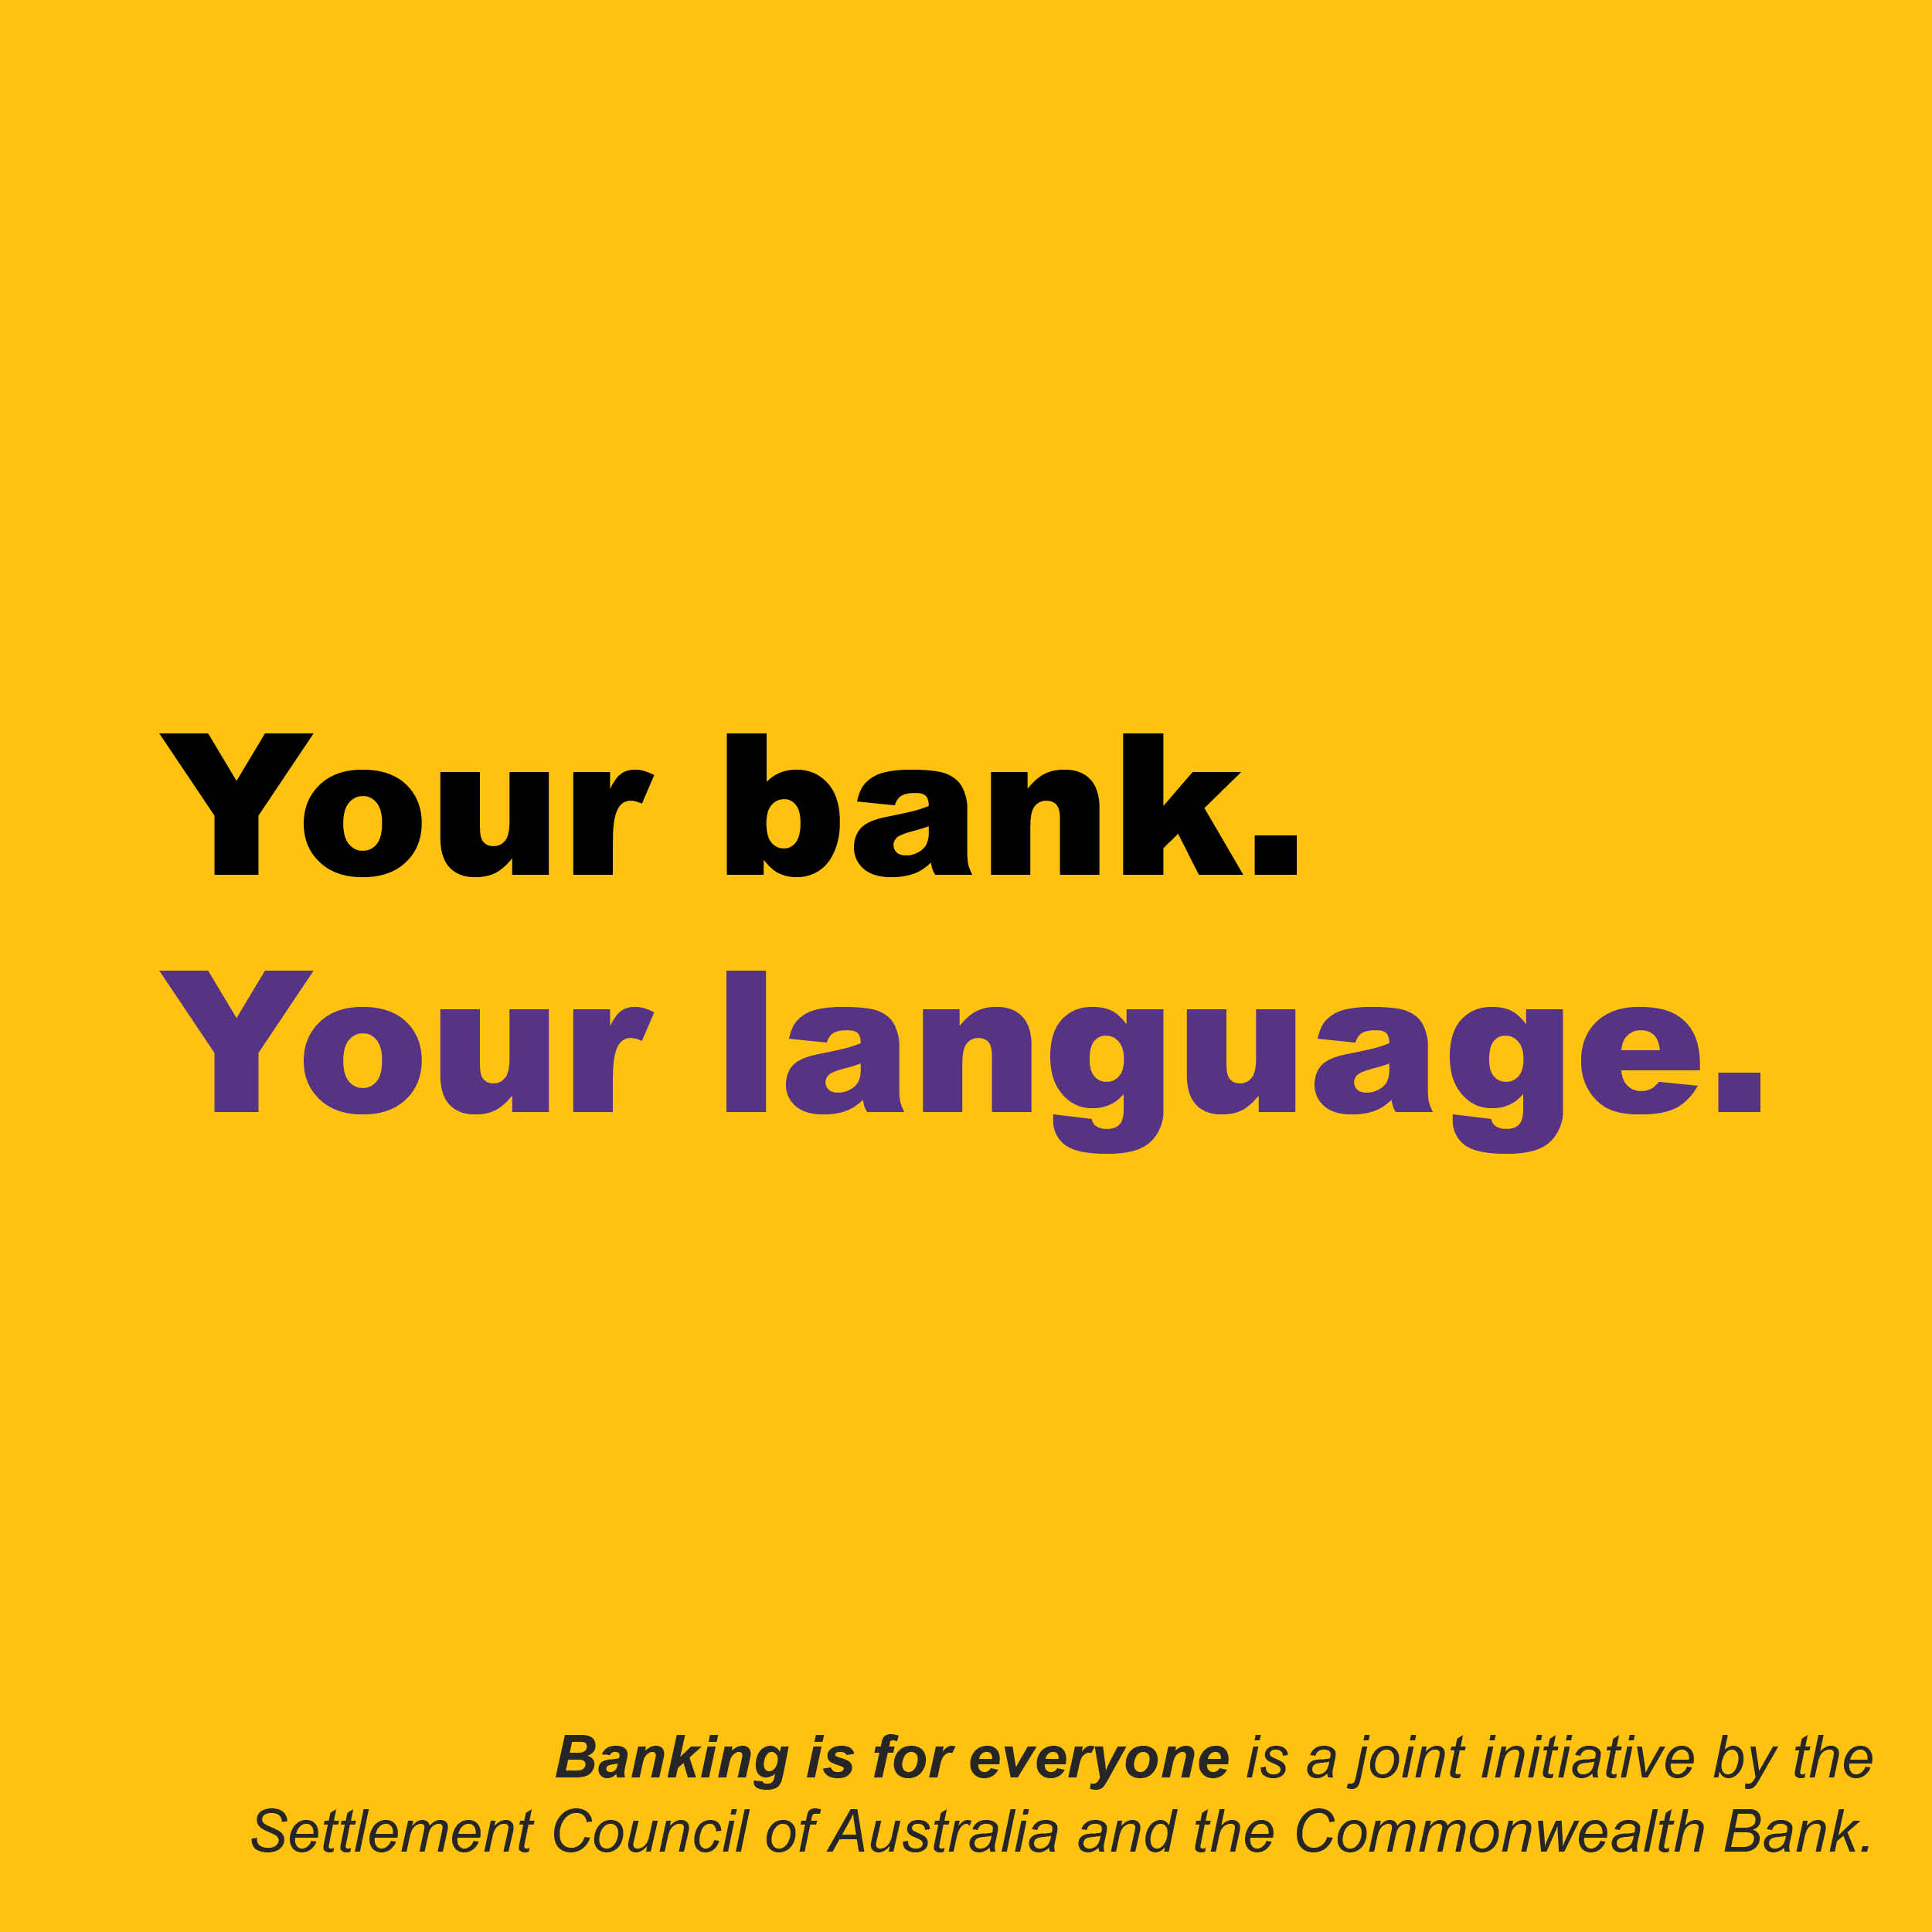 A yellow square with the words 'Your bank. Your language.' in large print and then smaller text at the bottom that says Banking is for everyone is a joint initiative by the Settlement Council of Australia and the Commonwealth Bank.